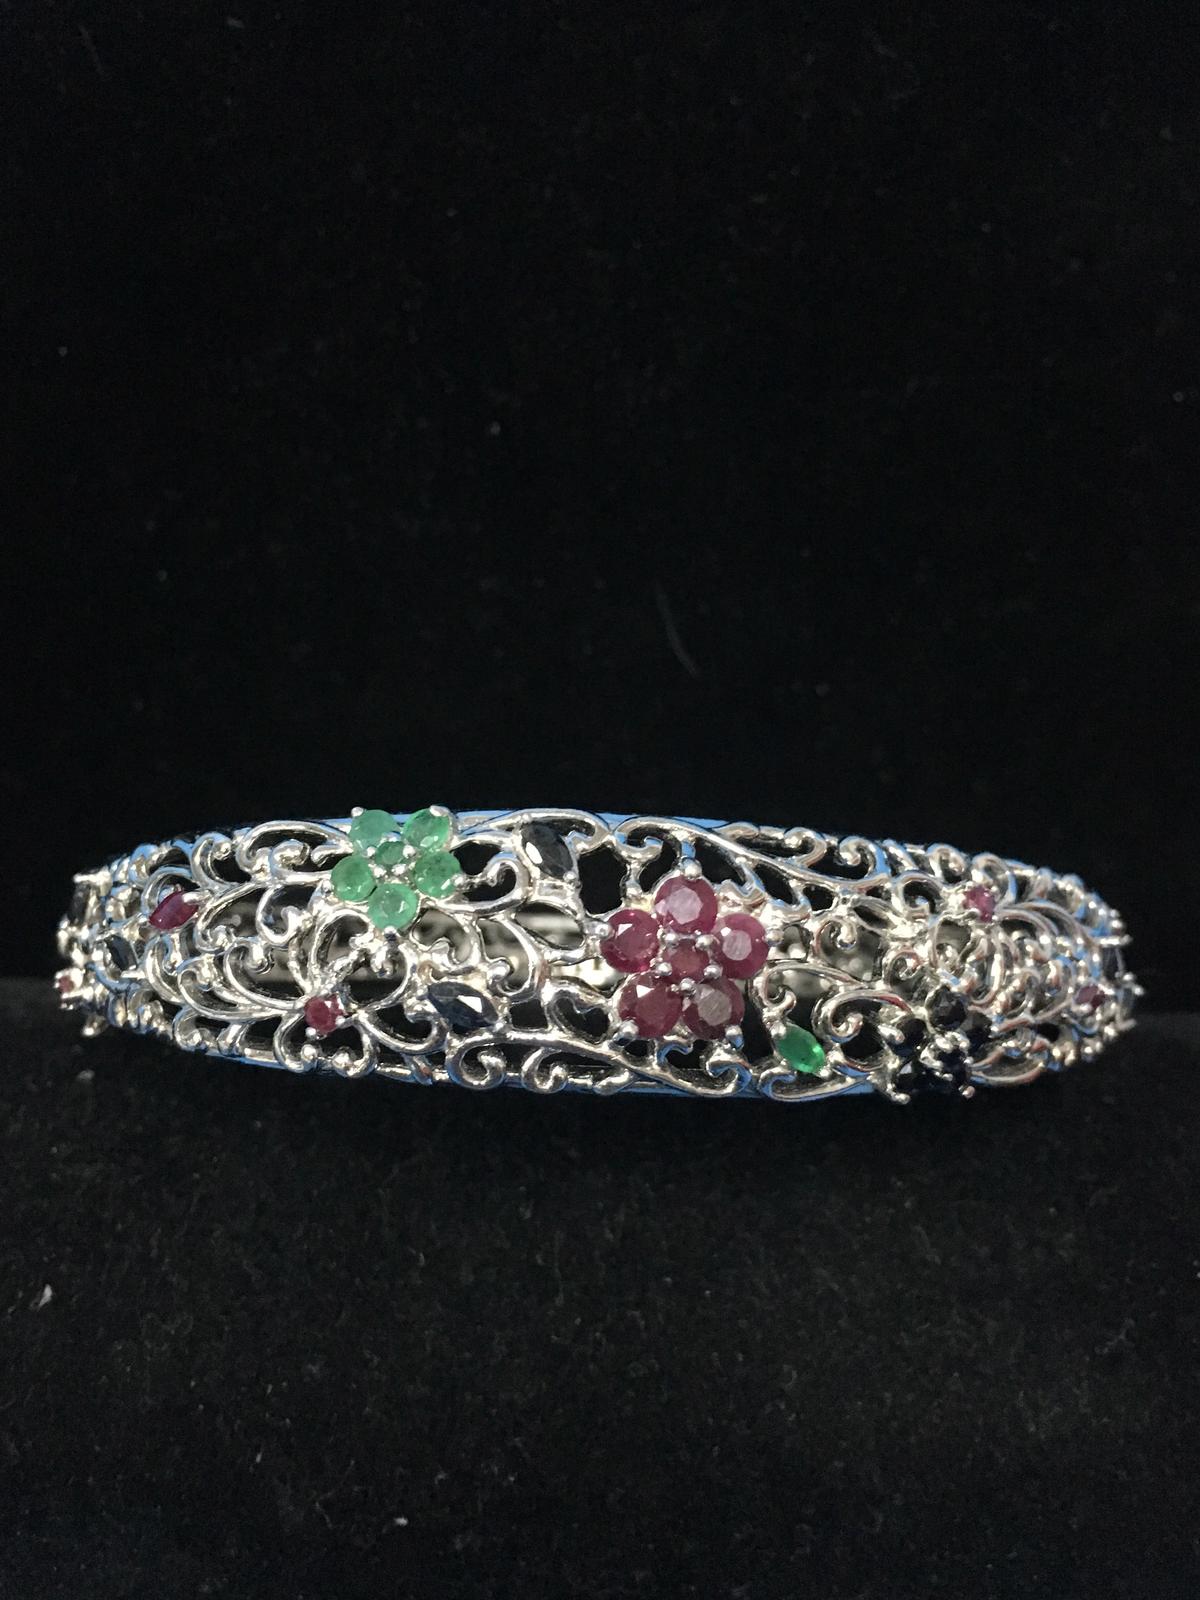 Beautiful Floral Sterling Silver Bangle Clasp Bracelet W/ Lap Created Emeralds, Rubies, & Sapphires